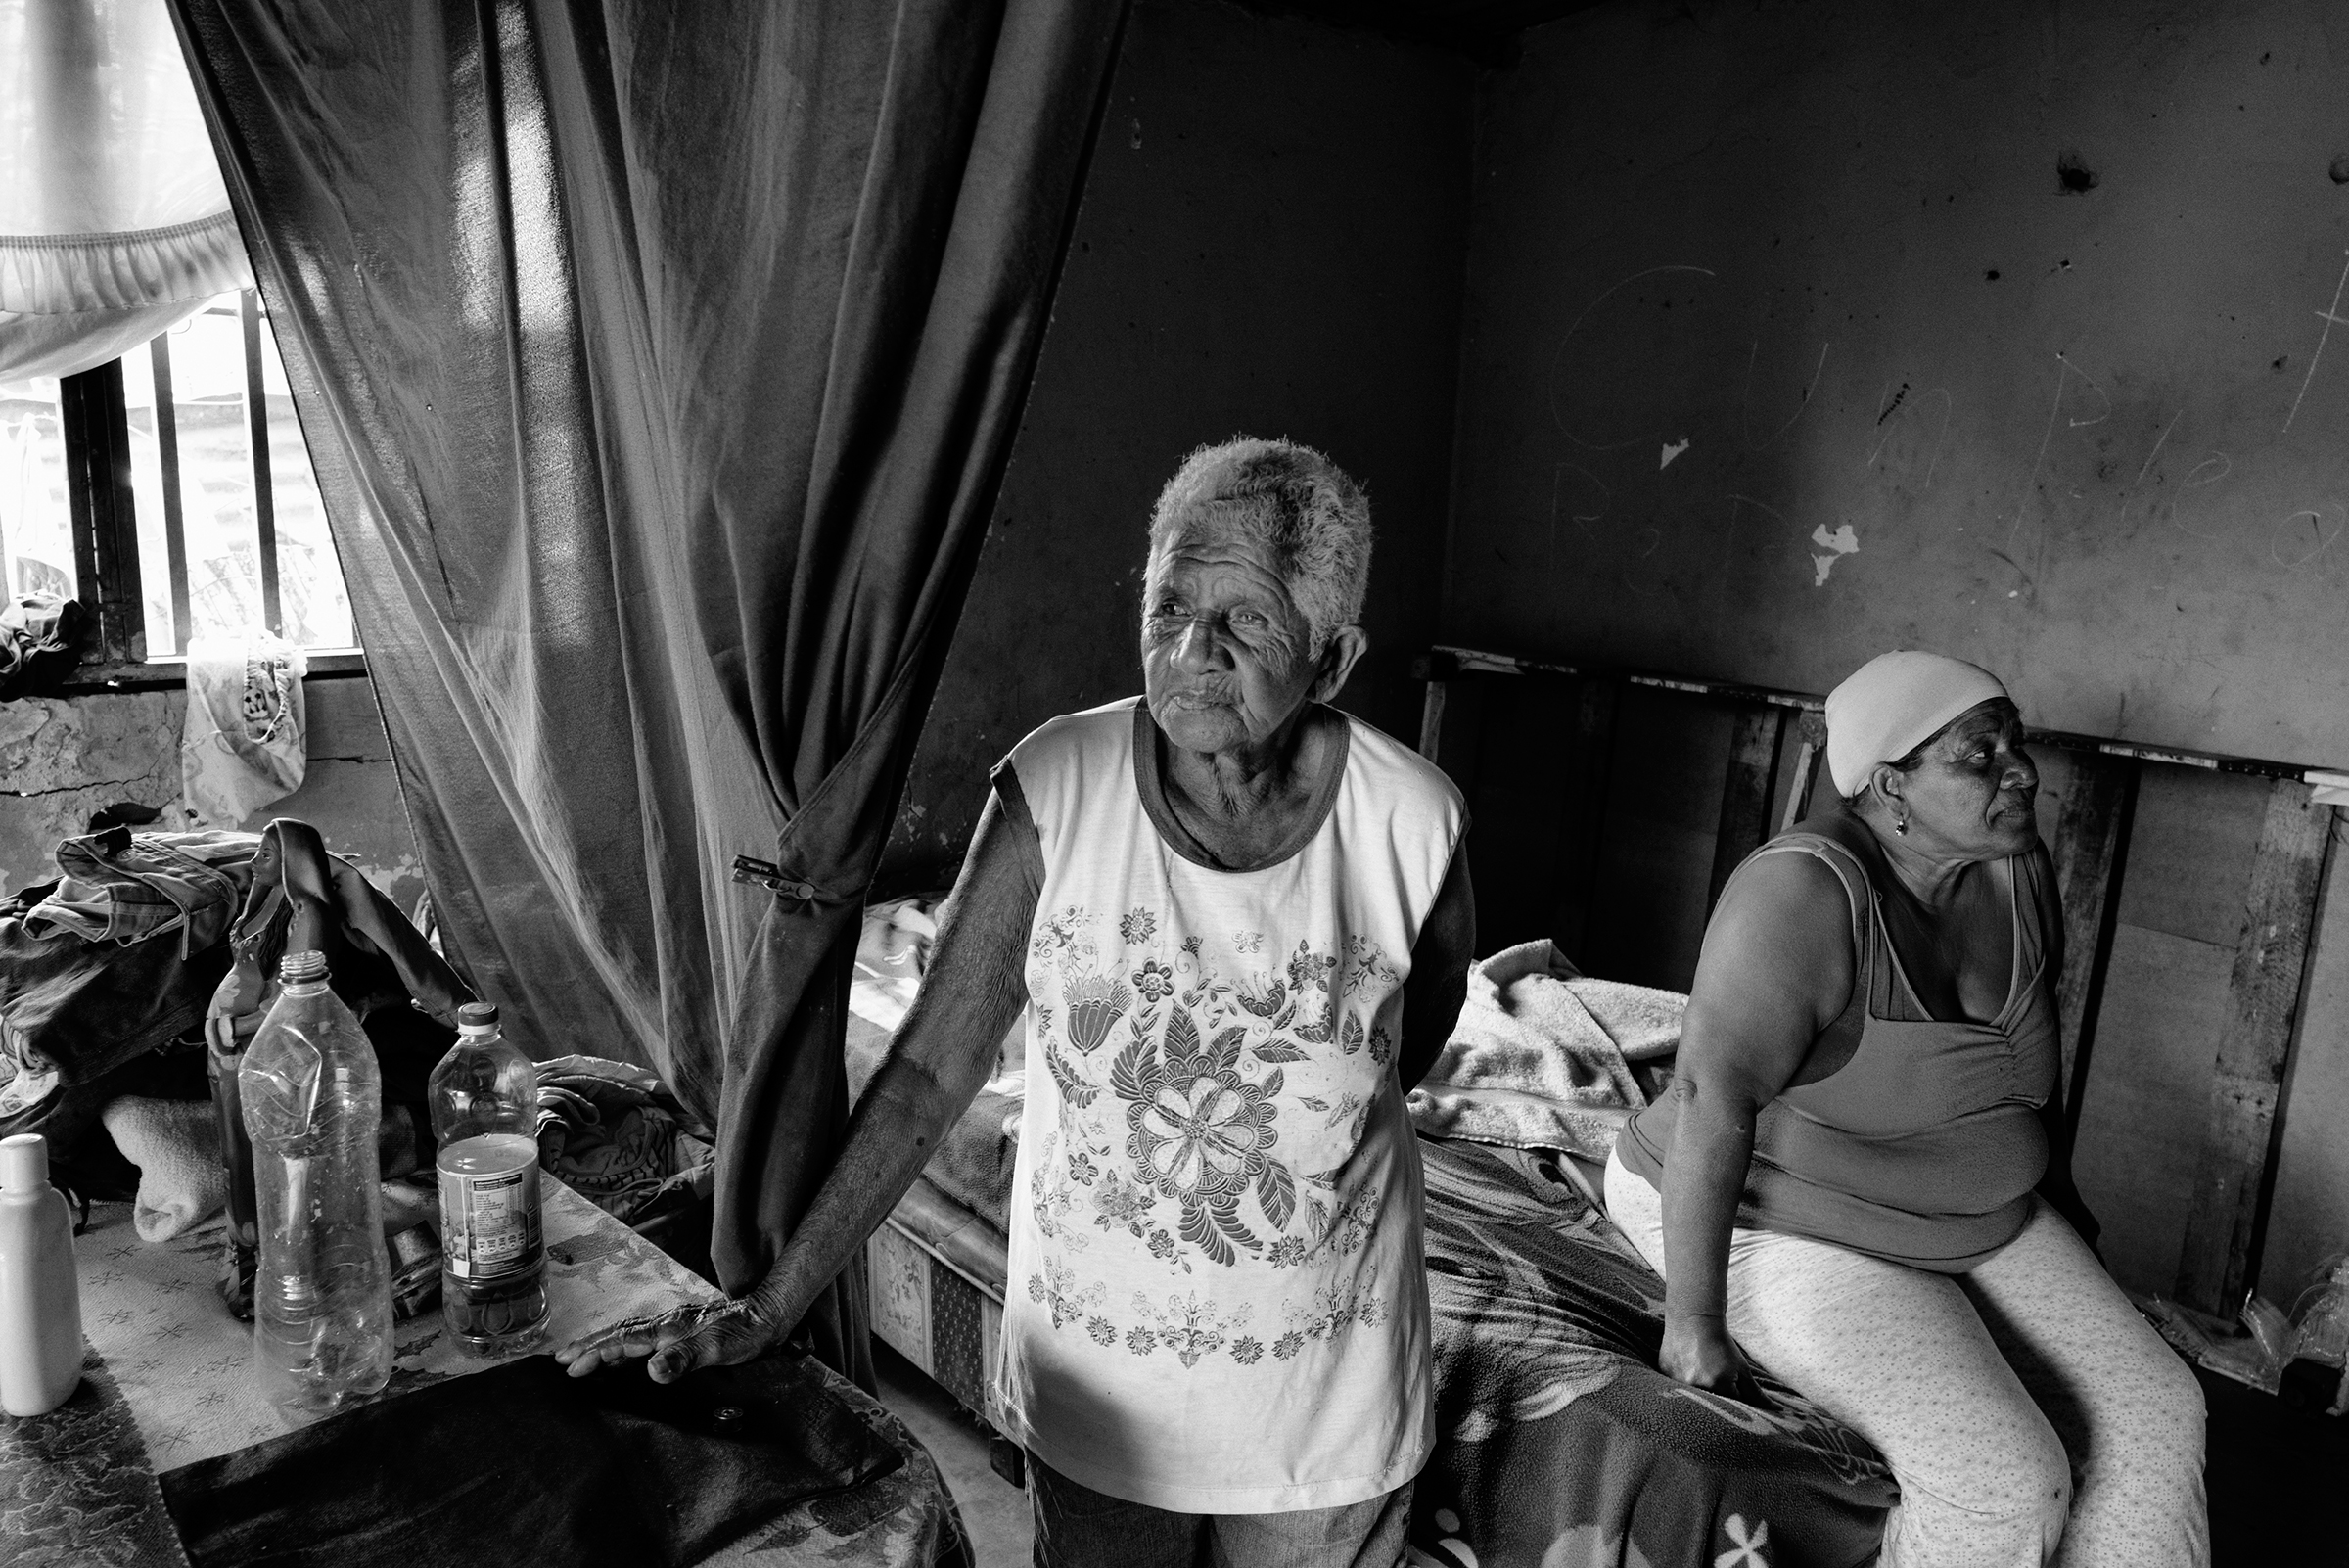 Petrona Herrera and her mother inside Herrera's house in Maracaibo in April. Three of her sons were alleged gang members who were killed by police in 2011, she says. (Alvaro Ybarra Zavala—Getty Images Reportage)